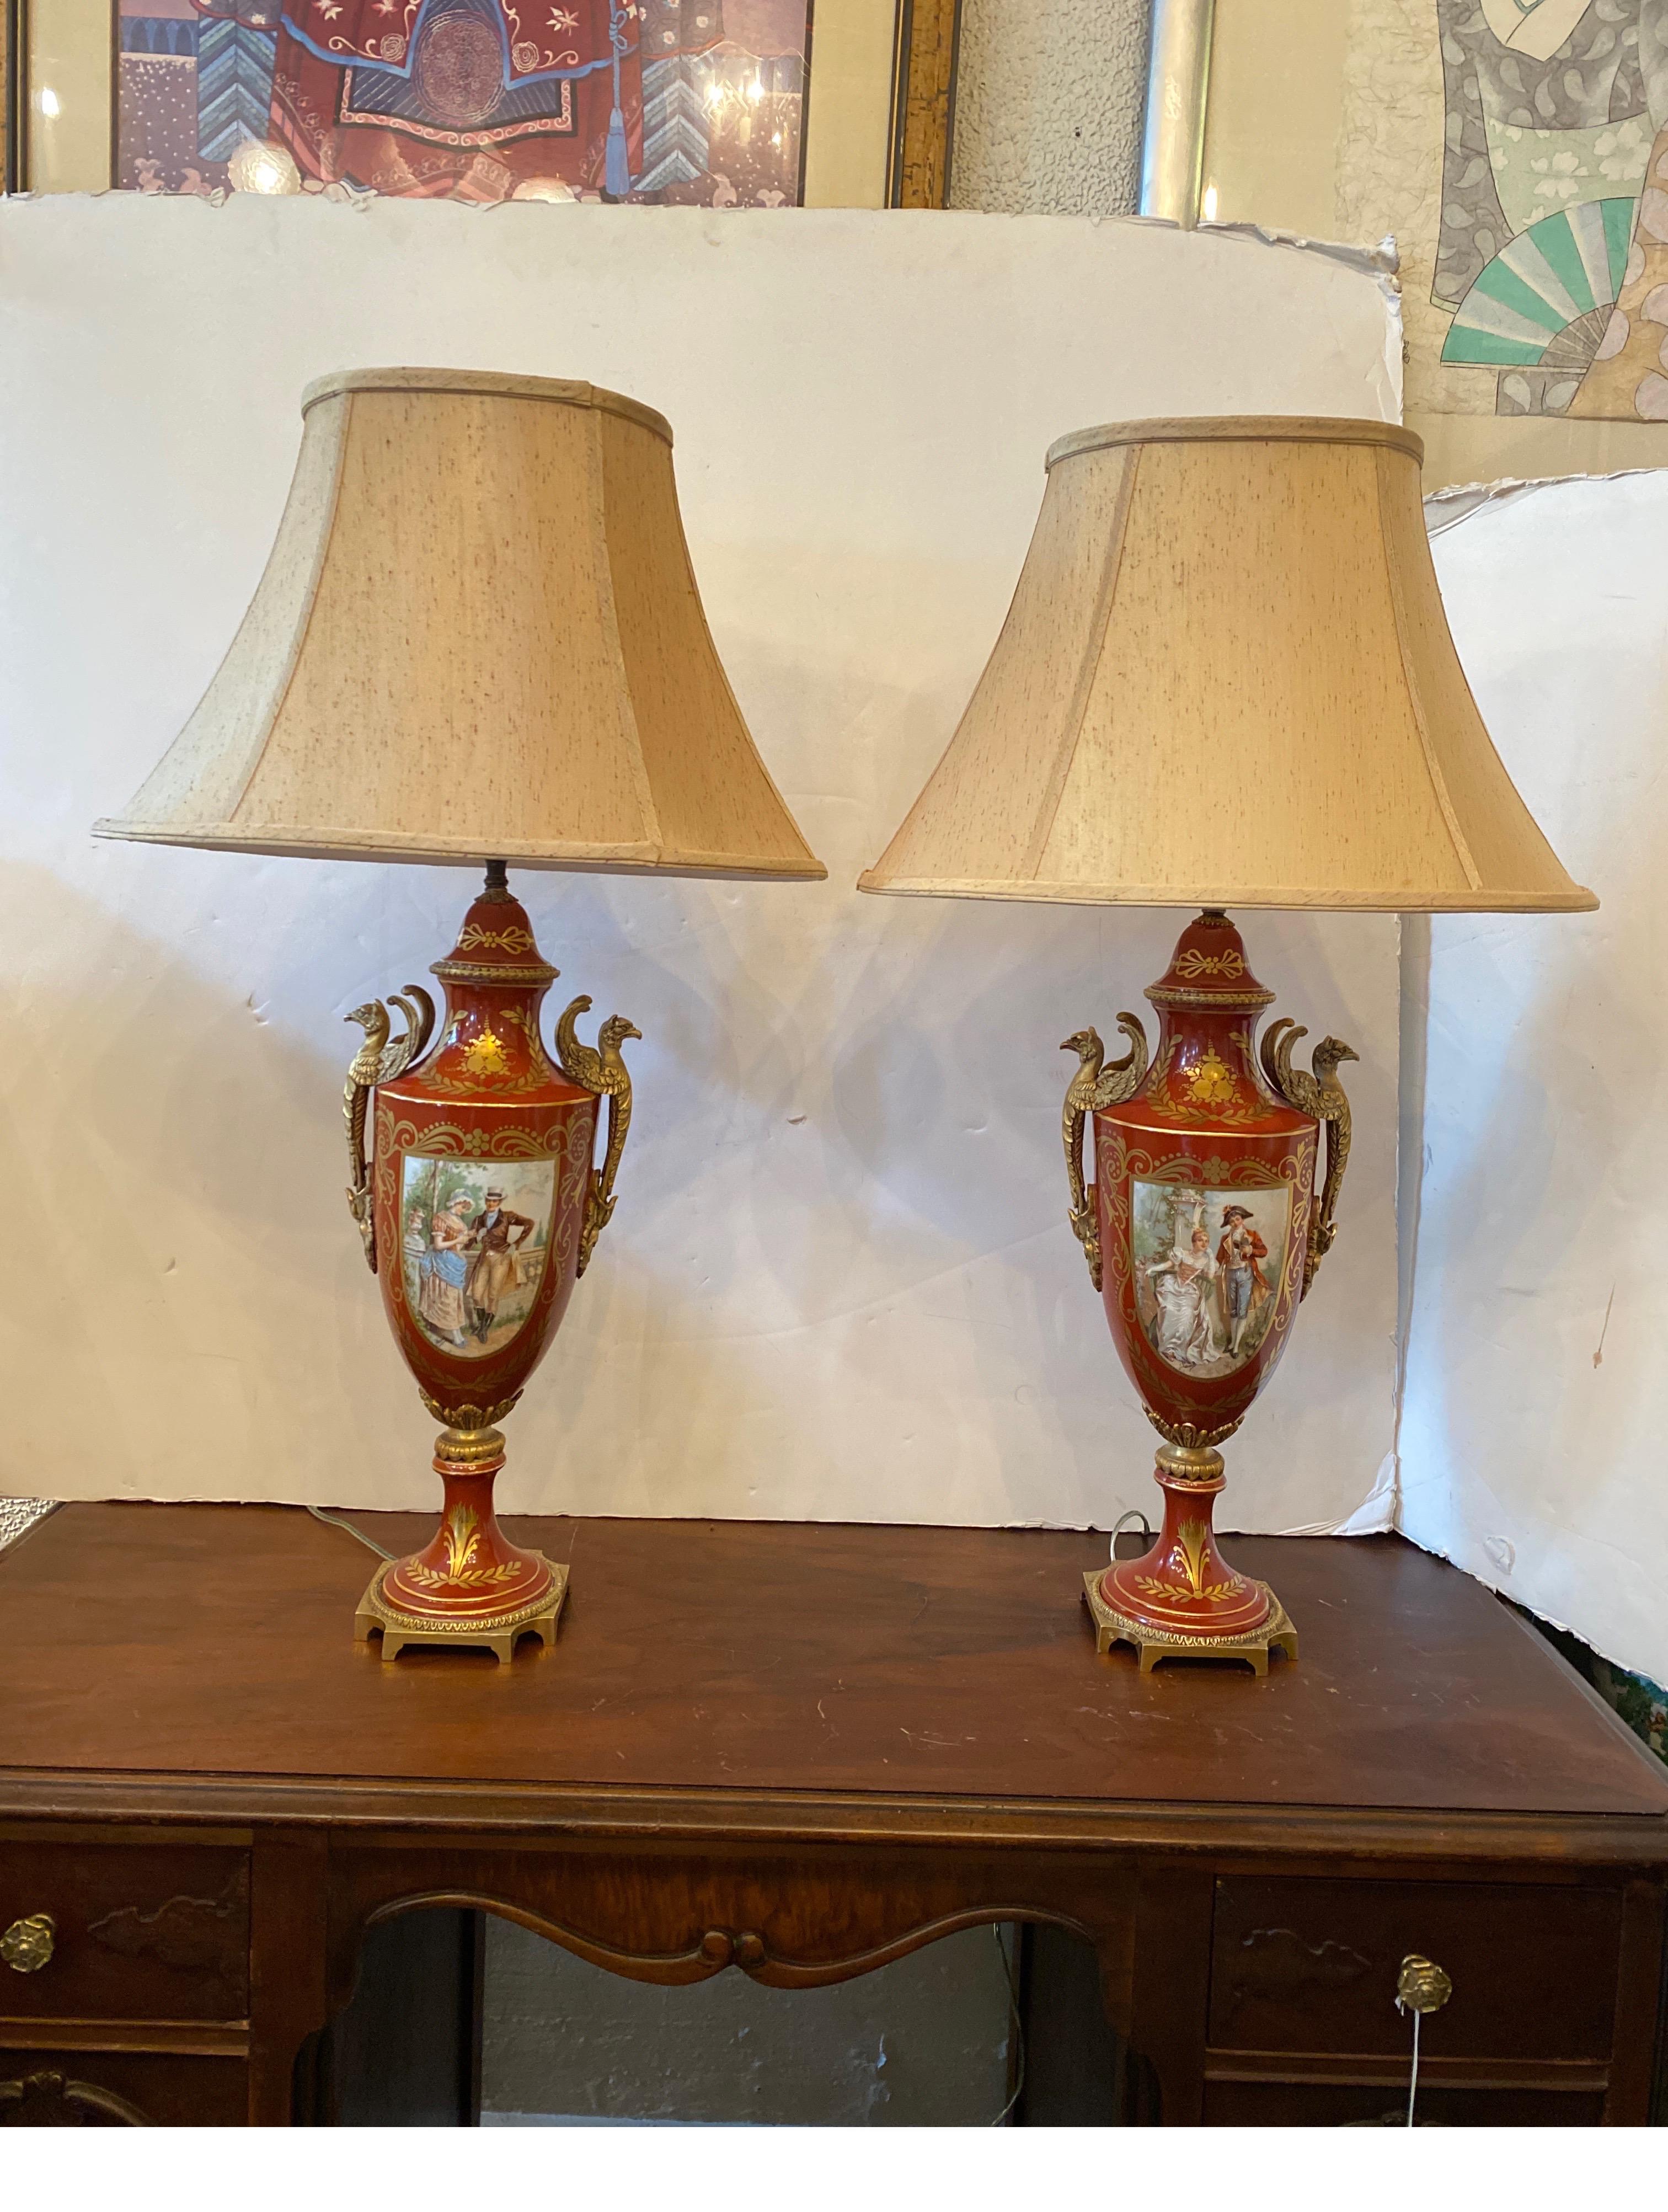 A Pair of French Porcelain Iron Red and gold urn form lamps.  The hand decorated front cartouches with gilt bronze handles and mounts.  The decorated panels with artist signature at the bottom.  These have a pseudo Sevres mark but are Limoges